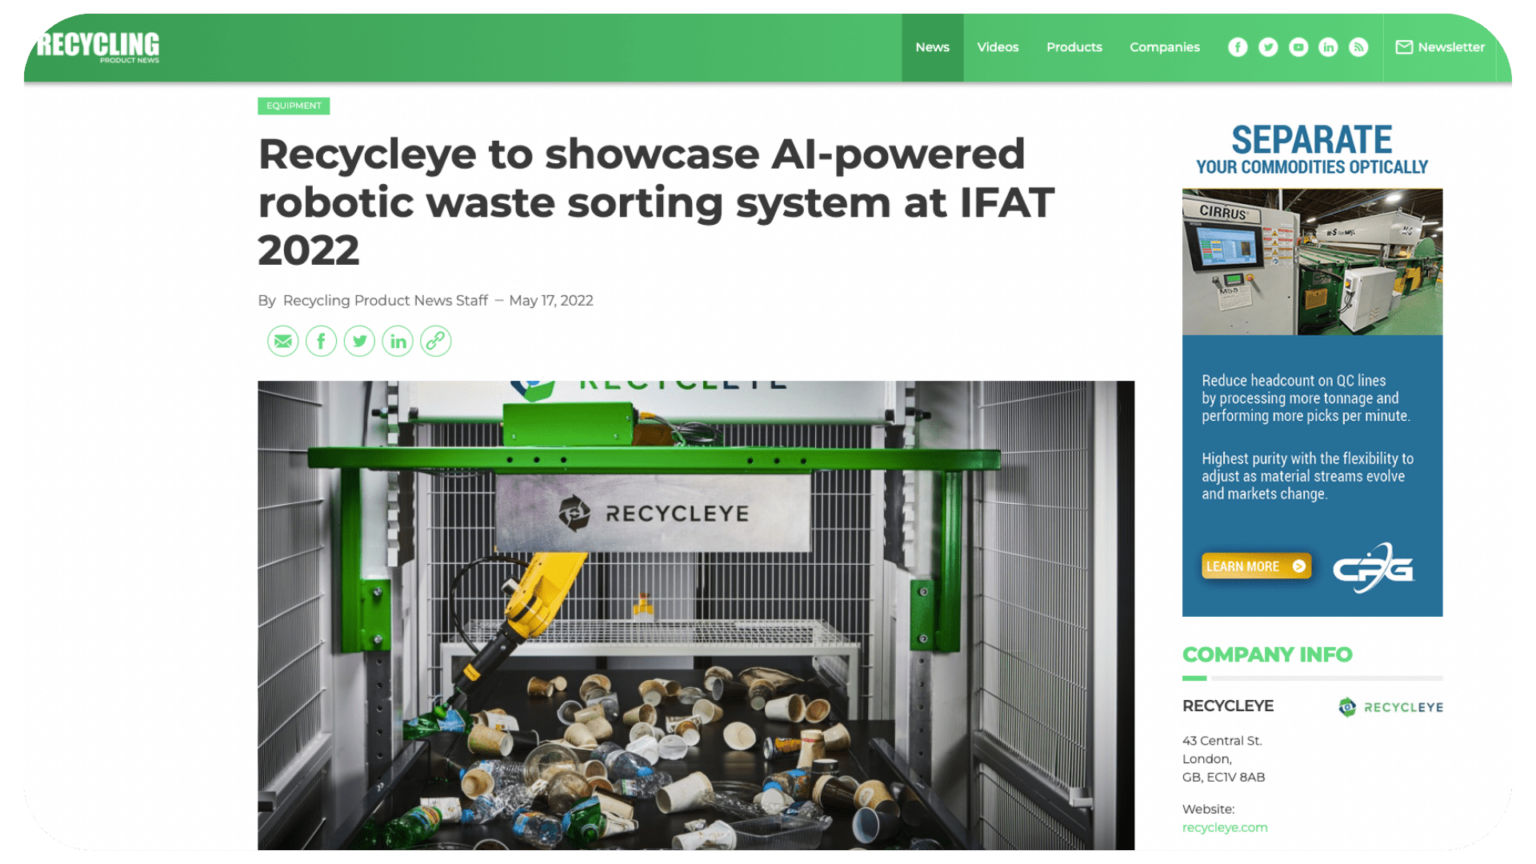 Recycling Product News article